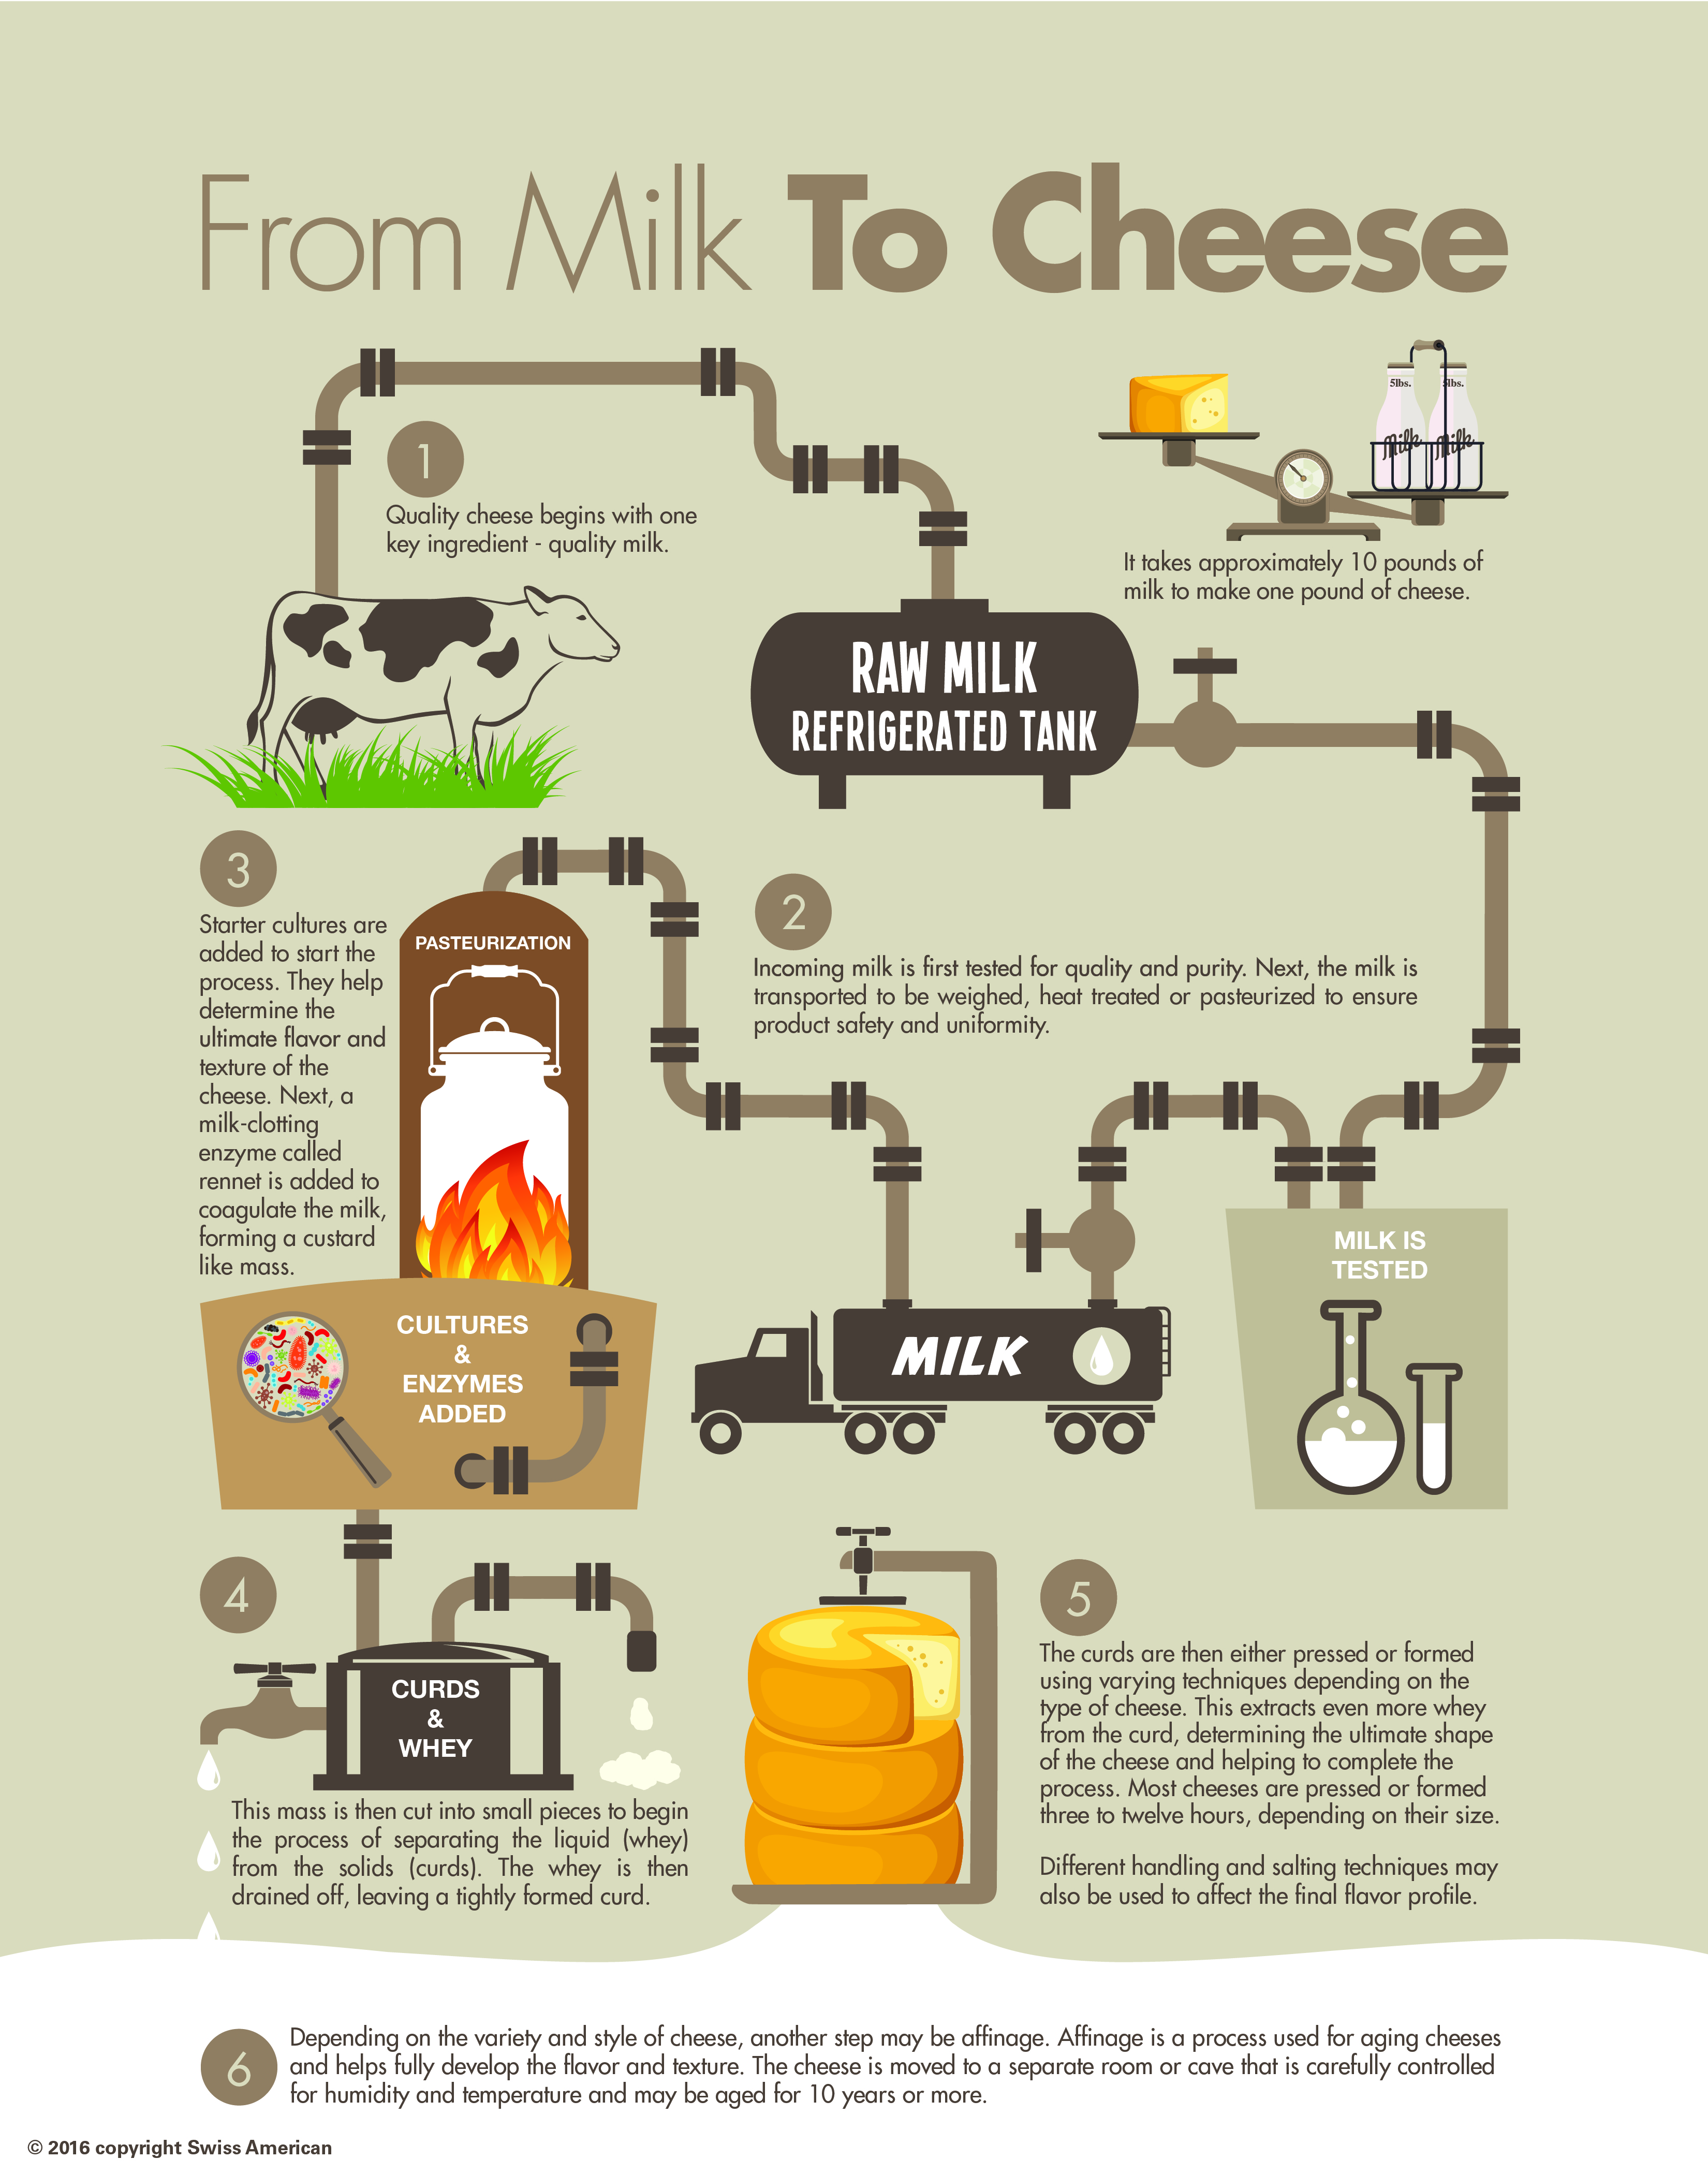 How Cheese is Made